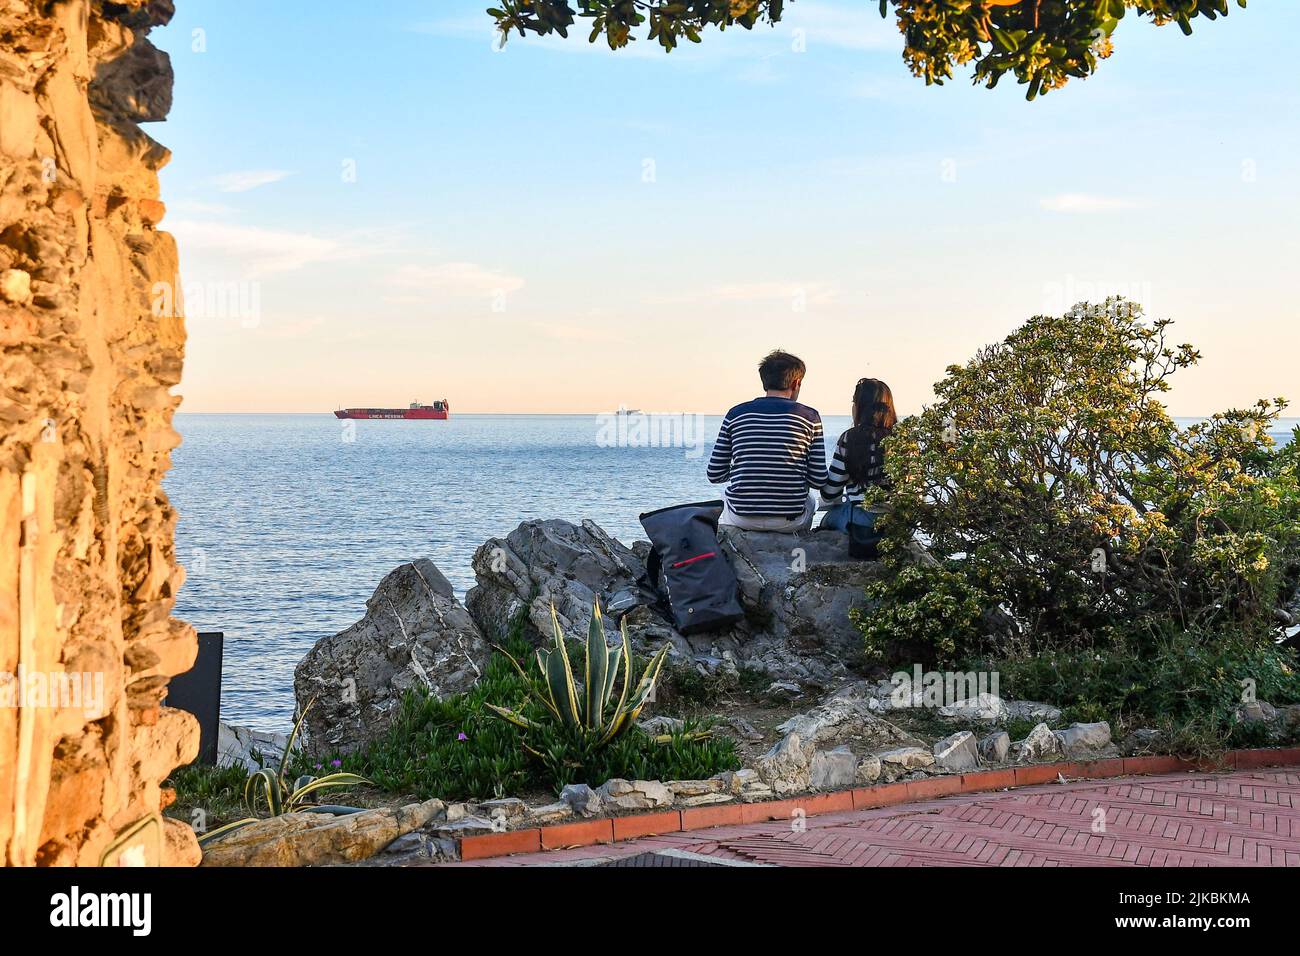 A young couple from behind enjoying the view from the Anita Garibaldi Promenade at sunset, Nervi, Genoa, Liguria, Italy Stock Photo